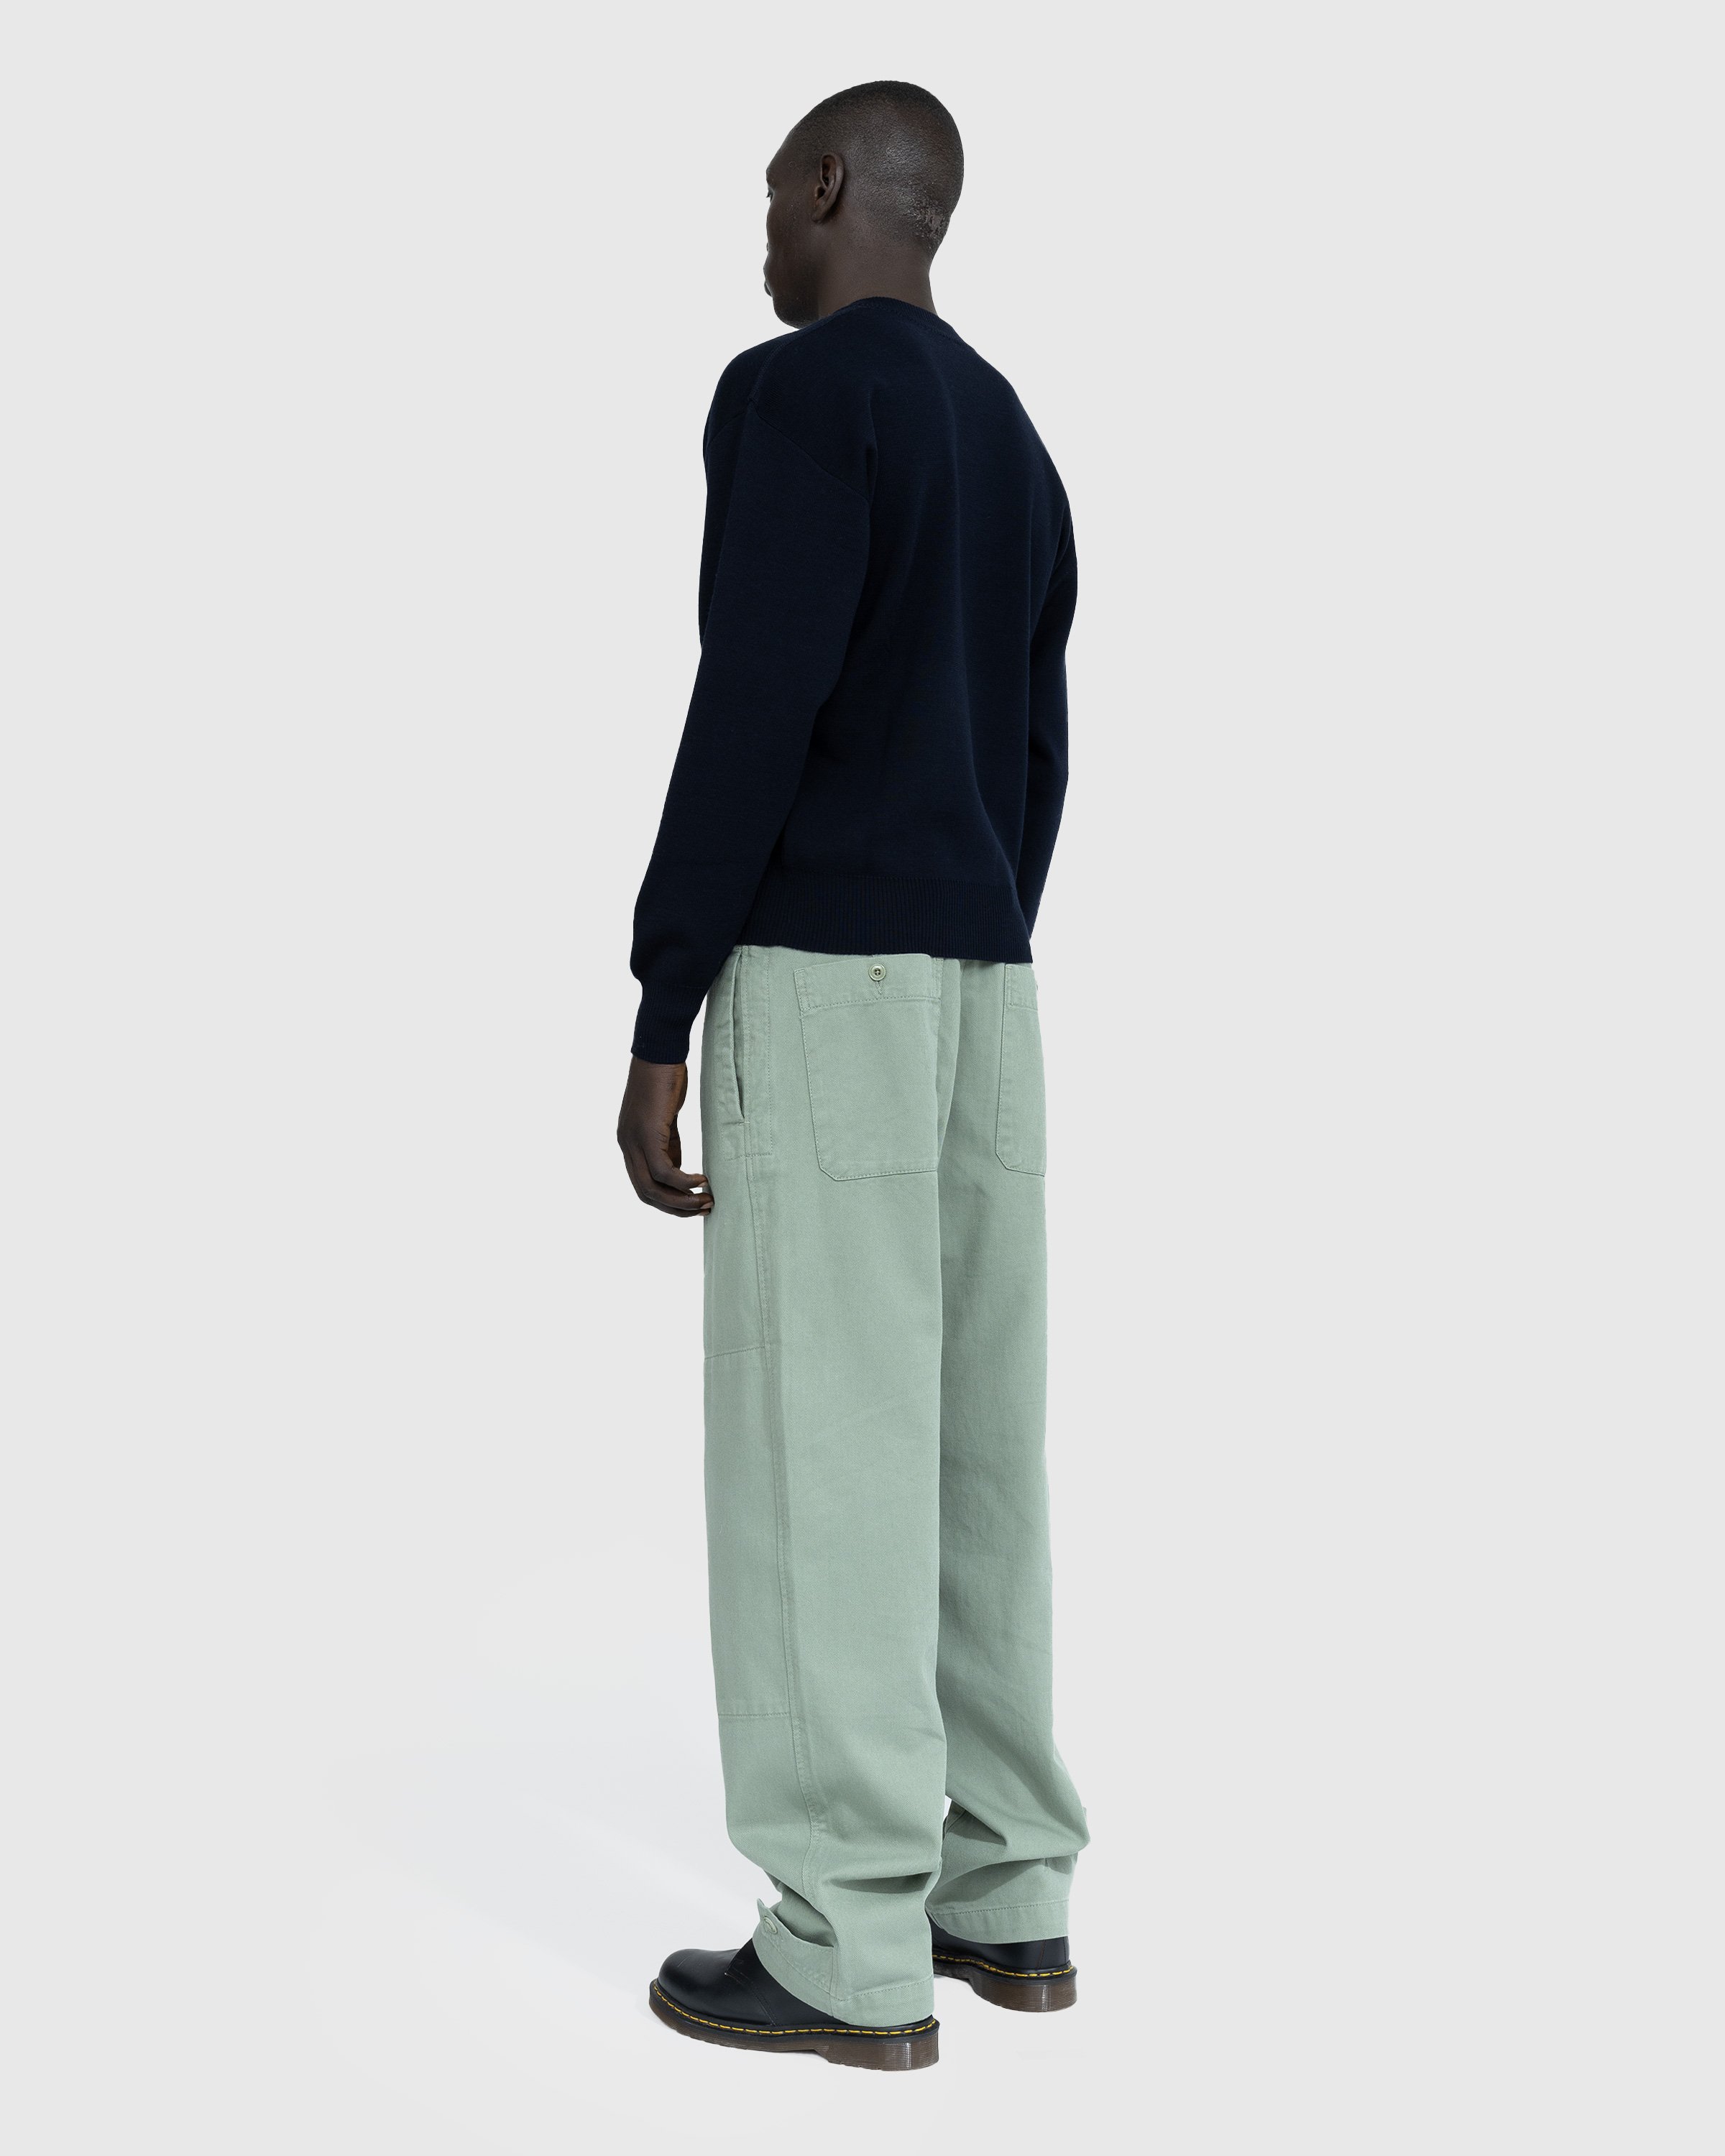 Lemaire - MILITARY PANTS - Clothing - Green - Image 4